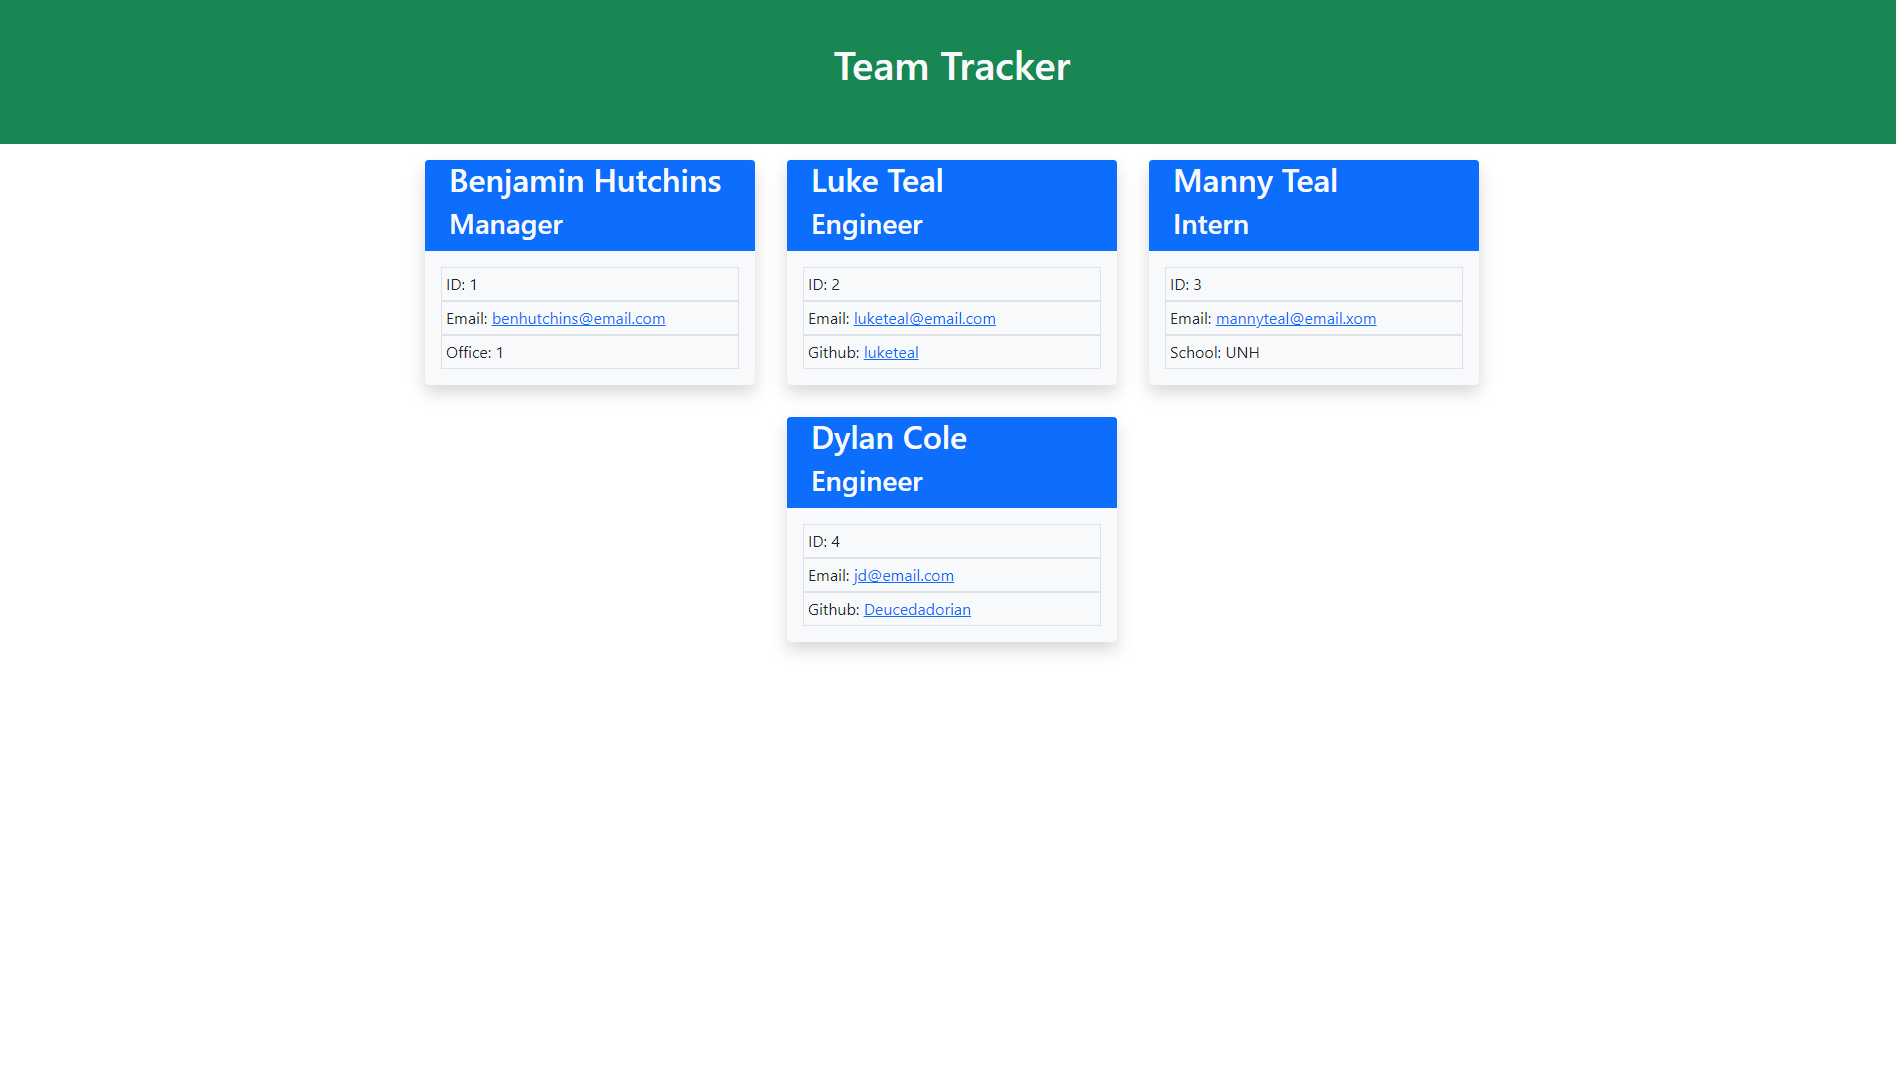 An image of a website created with the TeamTracker app with a header and cards with information for the team's Manager, Engineers, and interns.